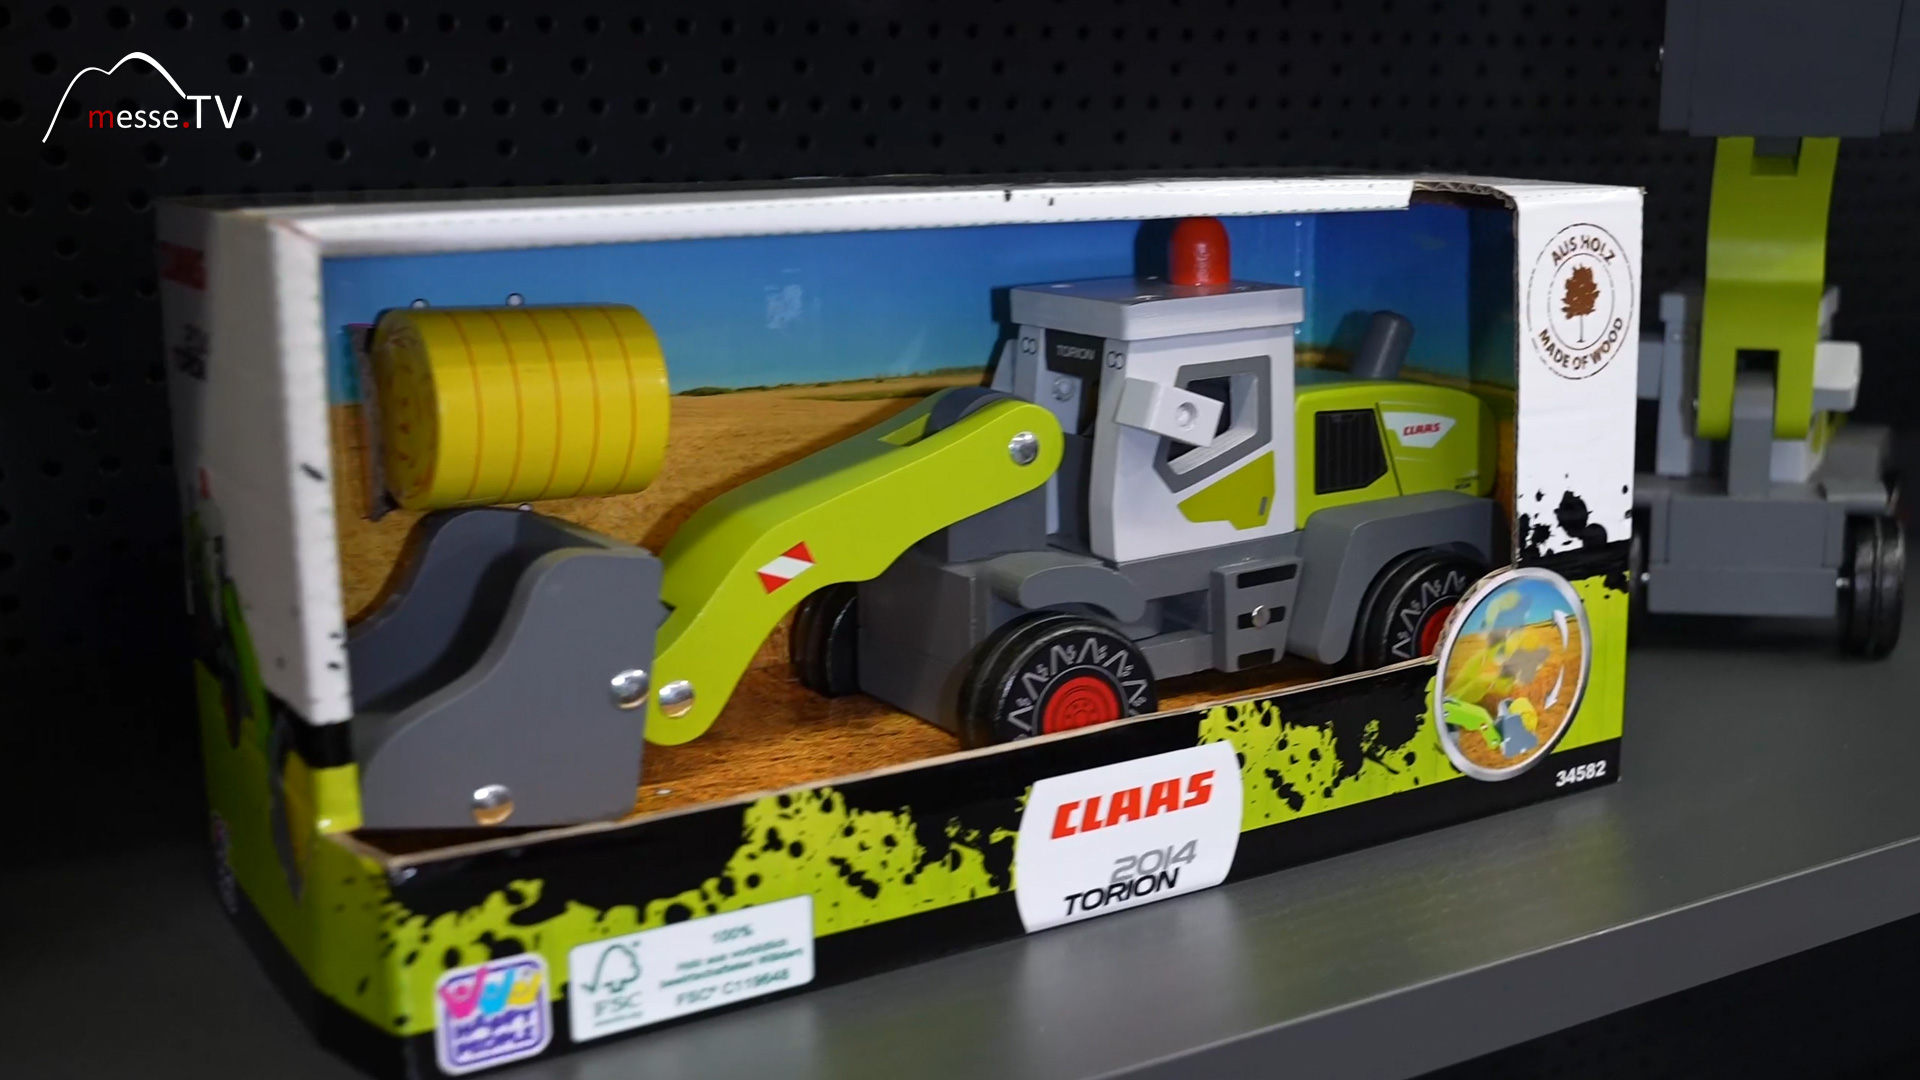 2014 Torion Claas wooden toy